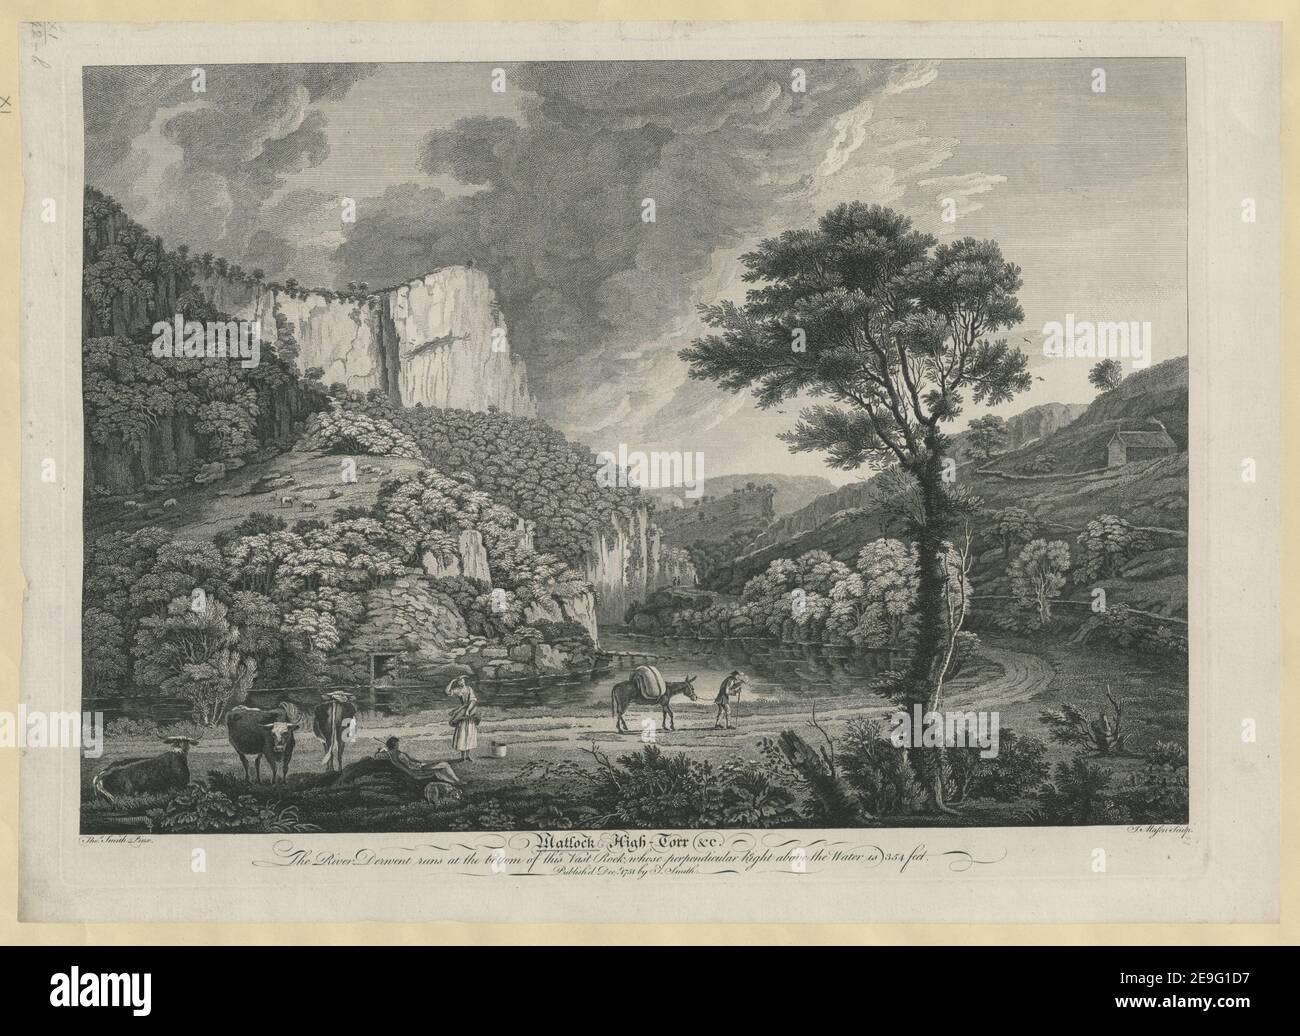 Matlock High Torr &c.  Author  Mason, James 11.42.b. Place of publication: [London] Publisher: Publish'd Dec.r 1751 by T. Smith, Date of publication: [1751]  Item type: 1 print Medium: etching Dimensions: platemark 39.7 x 53.8 cm.  Former owner: George III, King of Great Britain, 1738-1820 Stock Photo